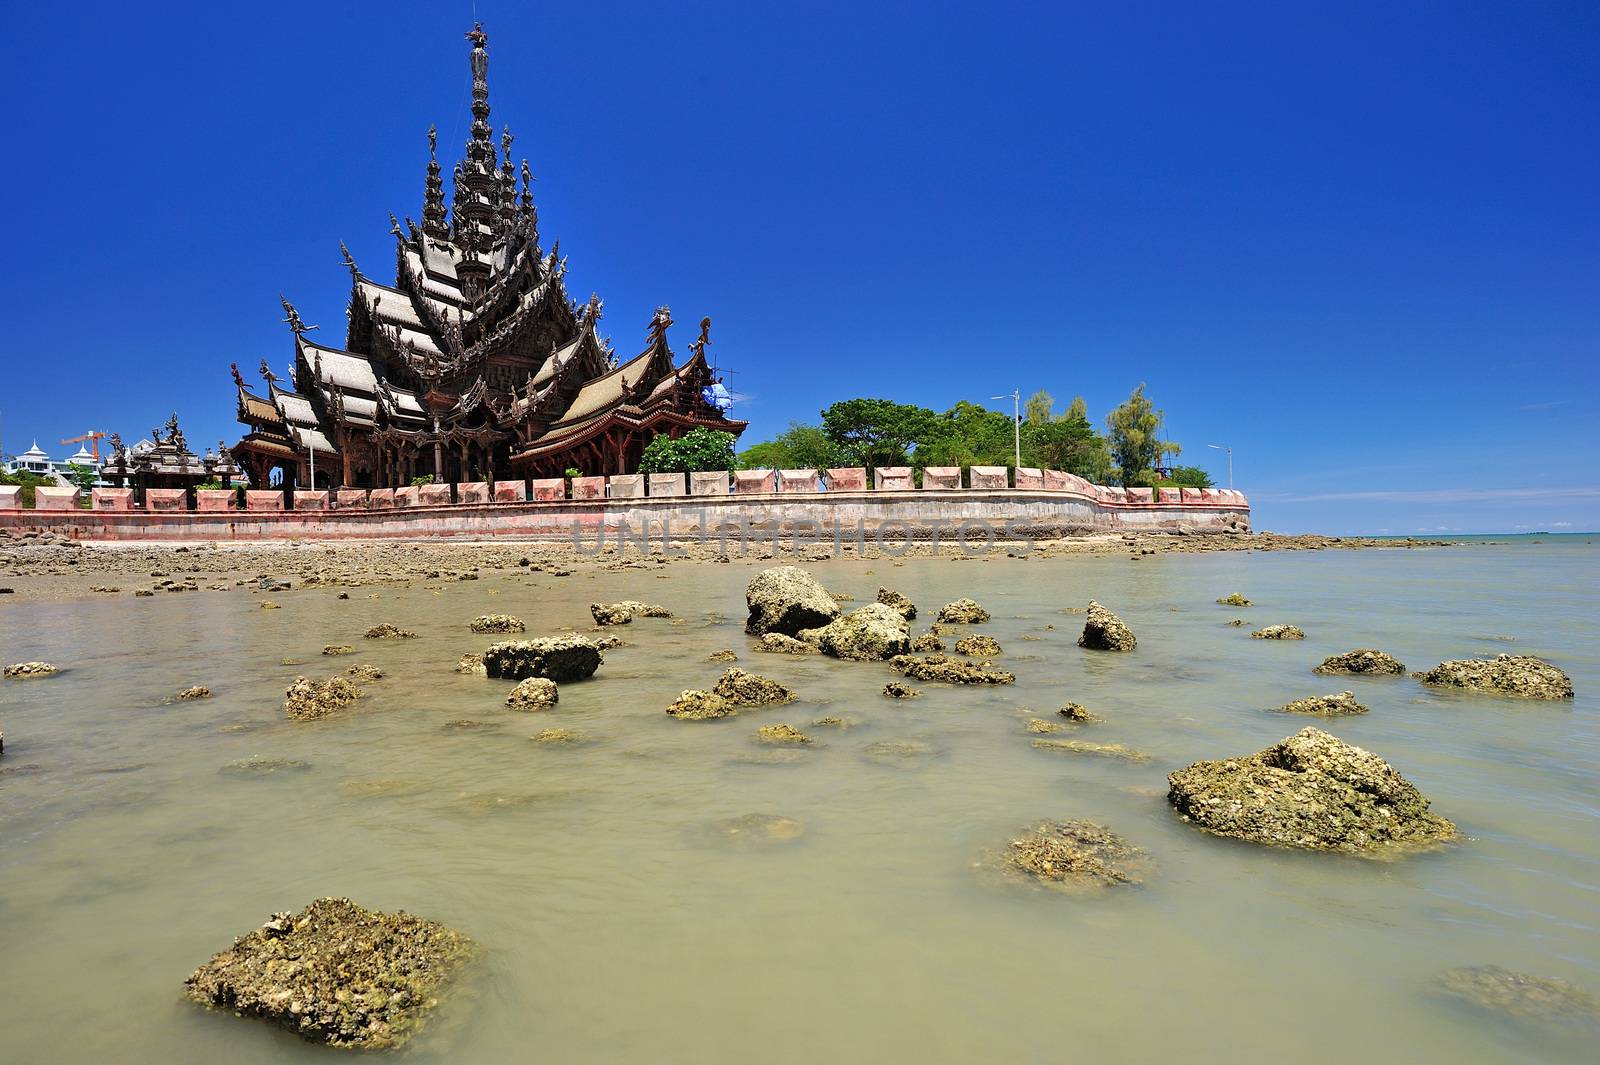 sanctuary of truth in Chonburi thailand by think4photop